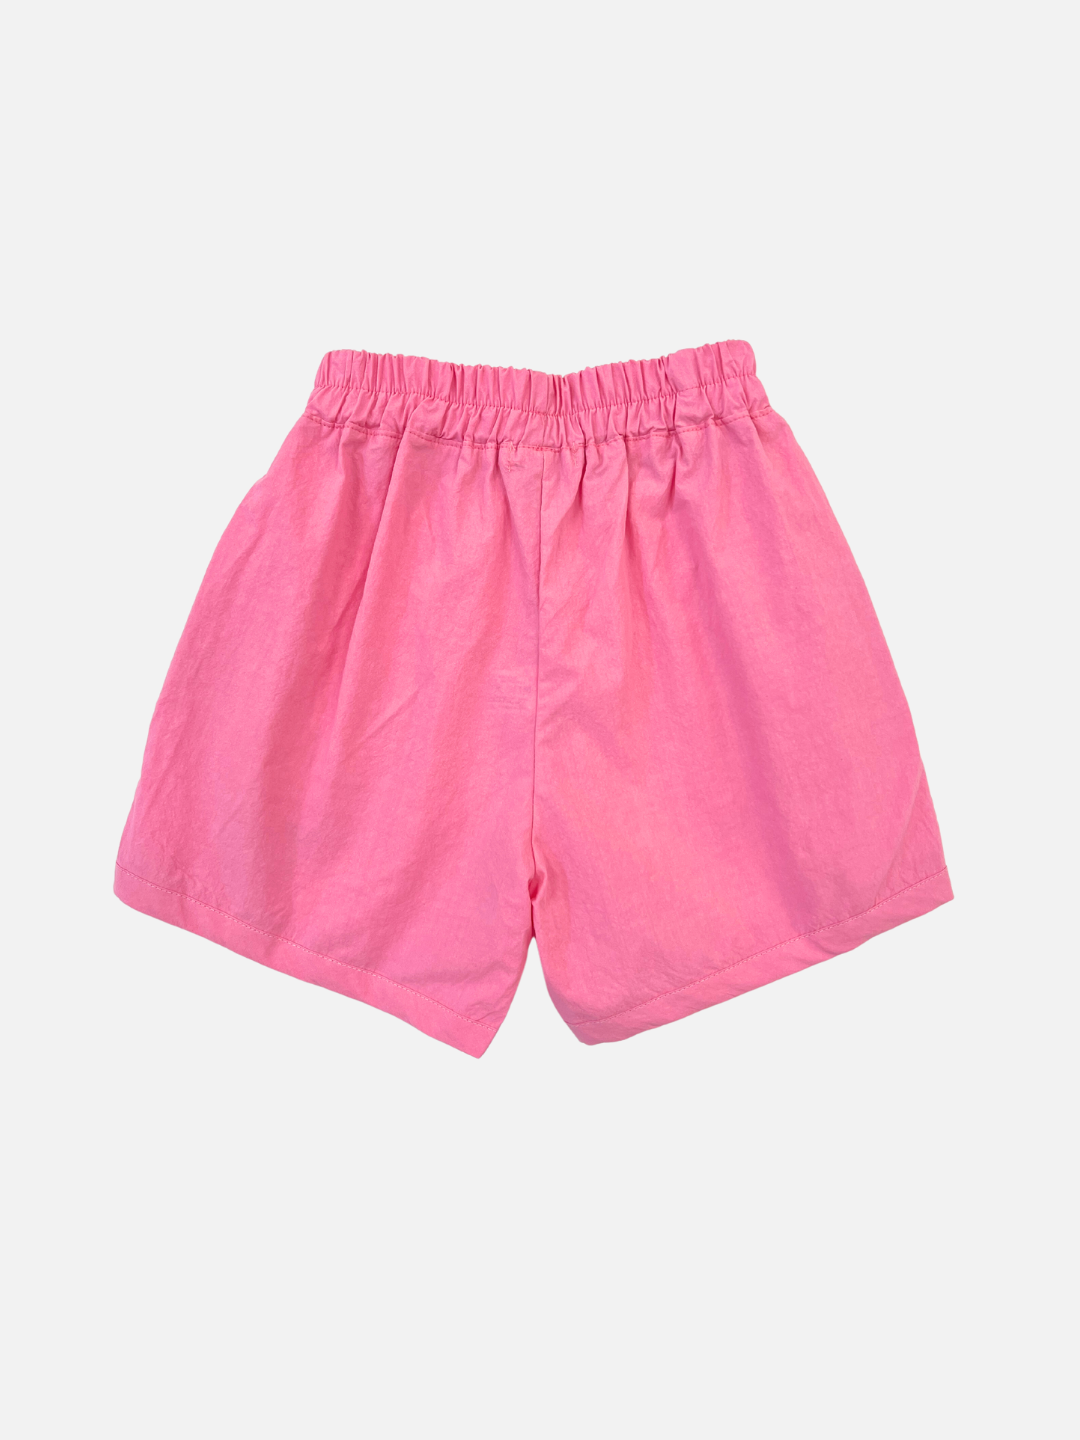 Watermelon | Back view of kids' pink shorts.